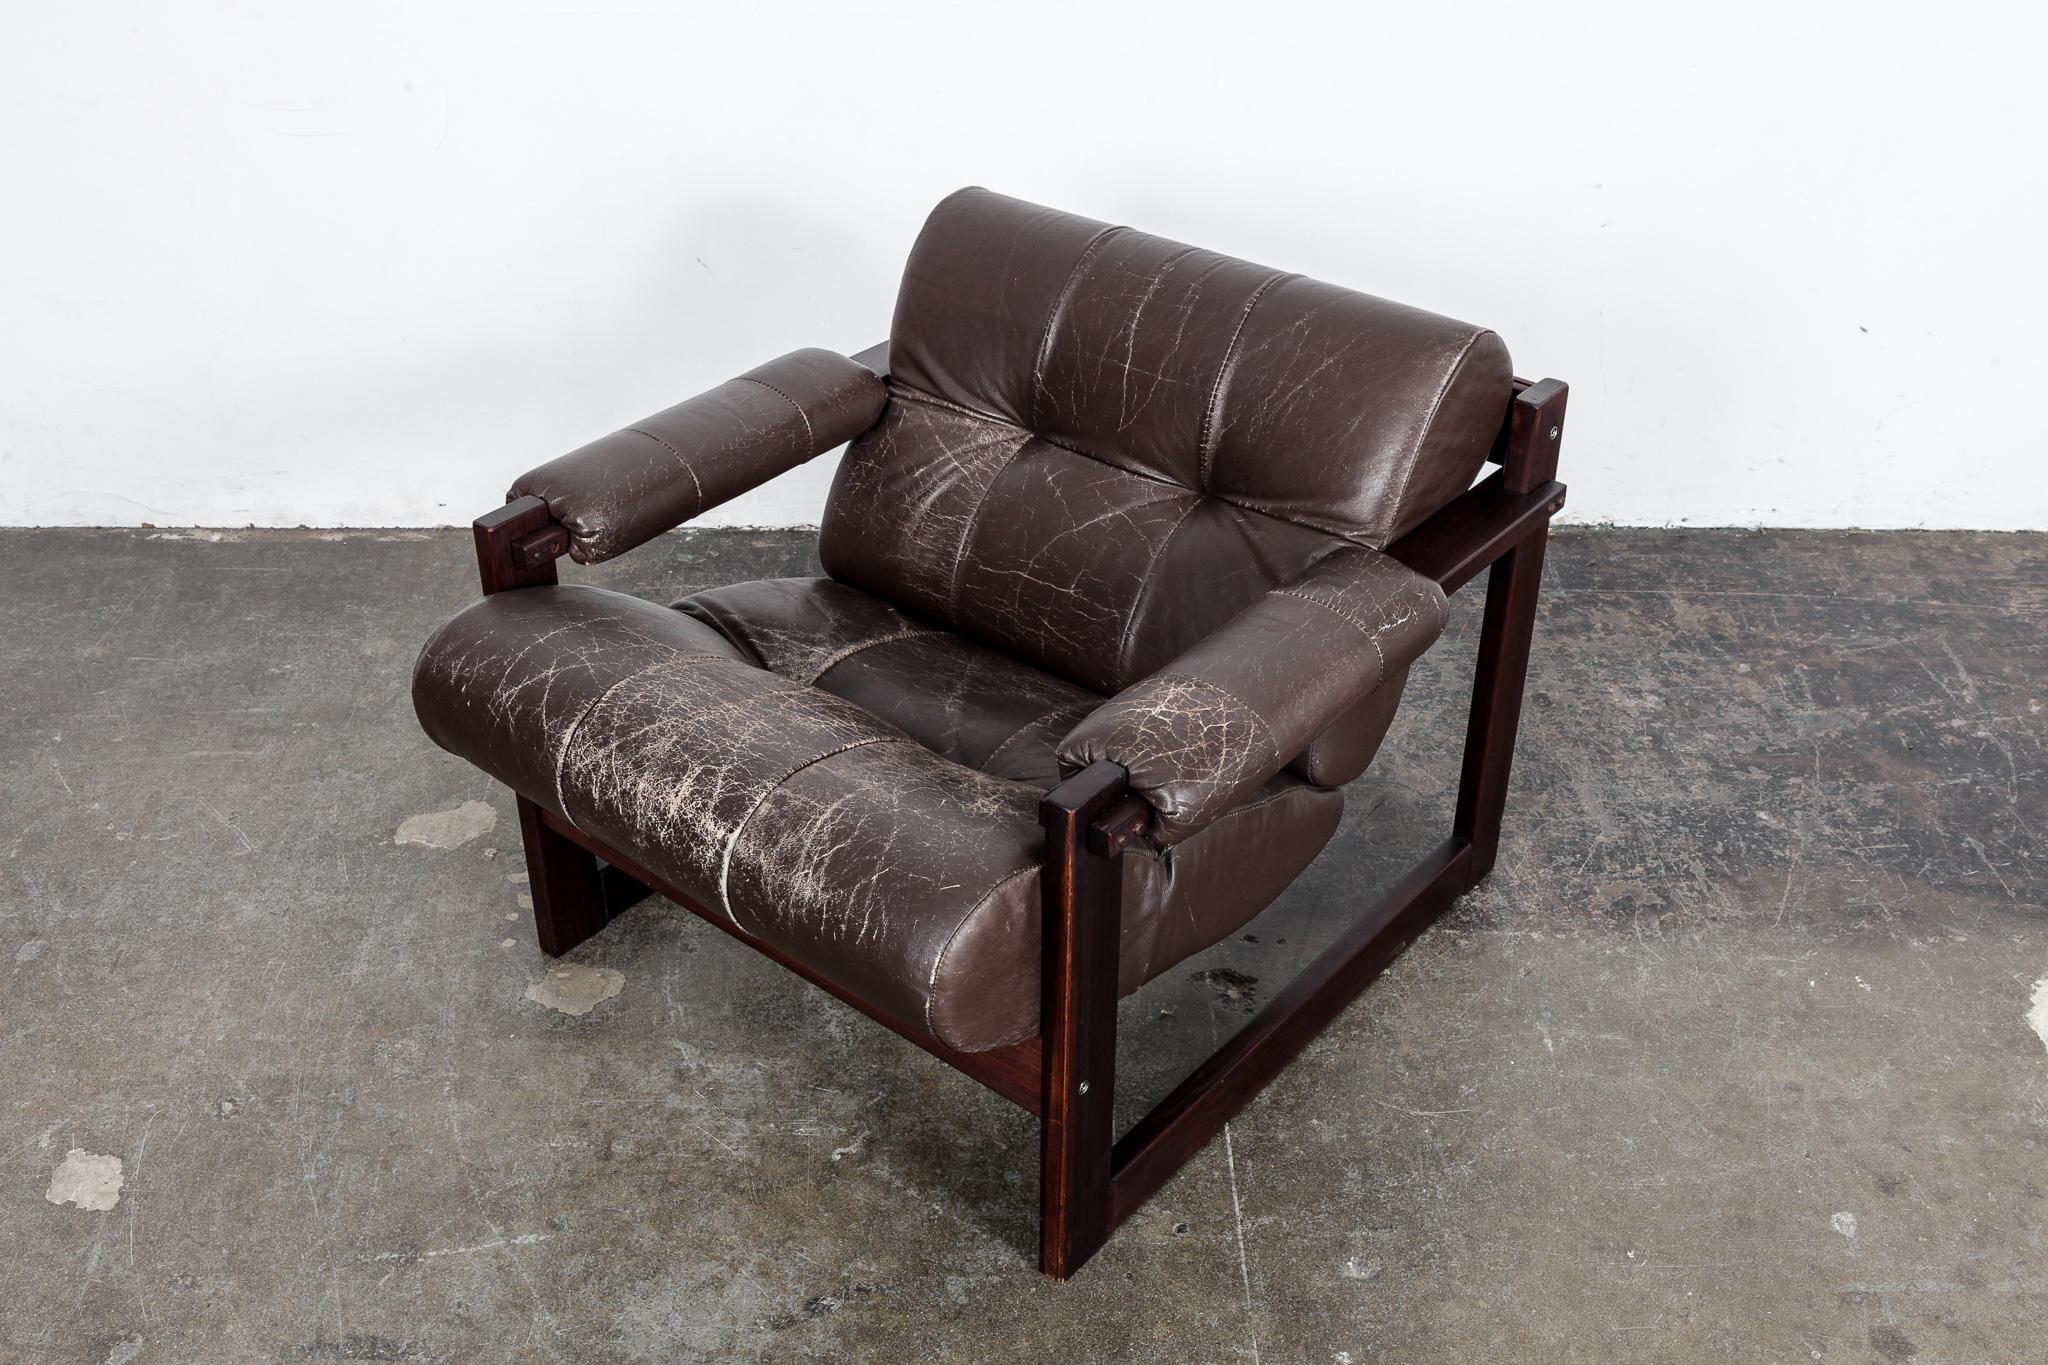 Percival Lafer MP-167 Brown Leather Lounge Chair, Jatoba Wood, Brazil, Lafer MP 2